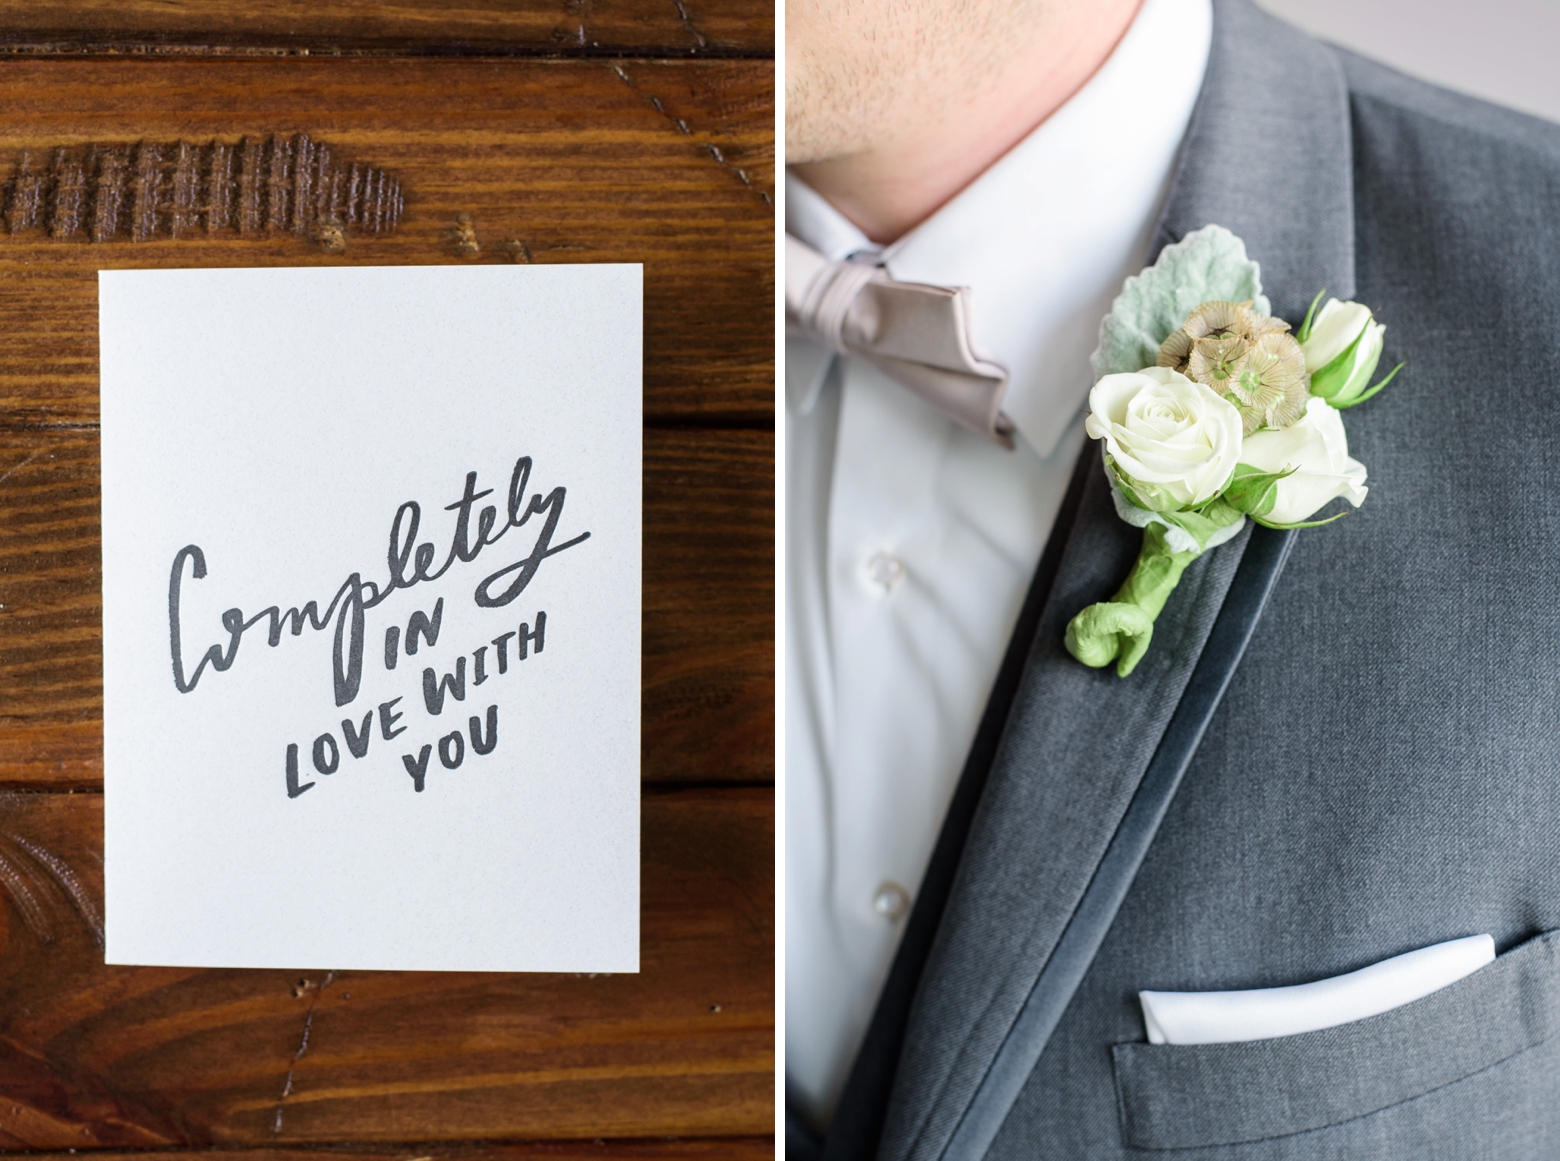 A card from the Bride to the Groom and a detail of his White floral boutonniere 